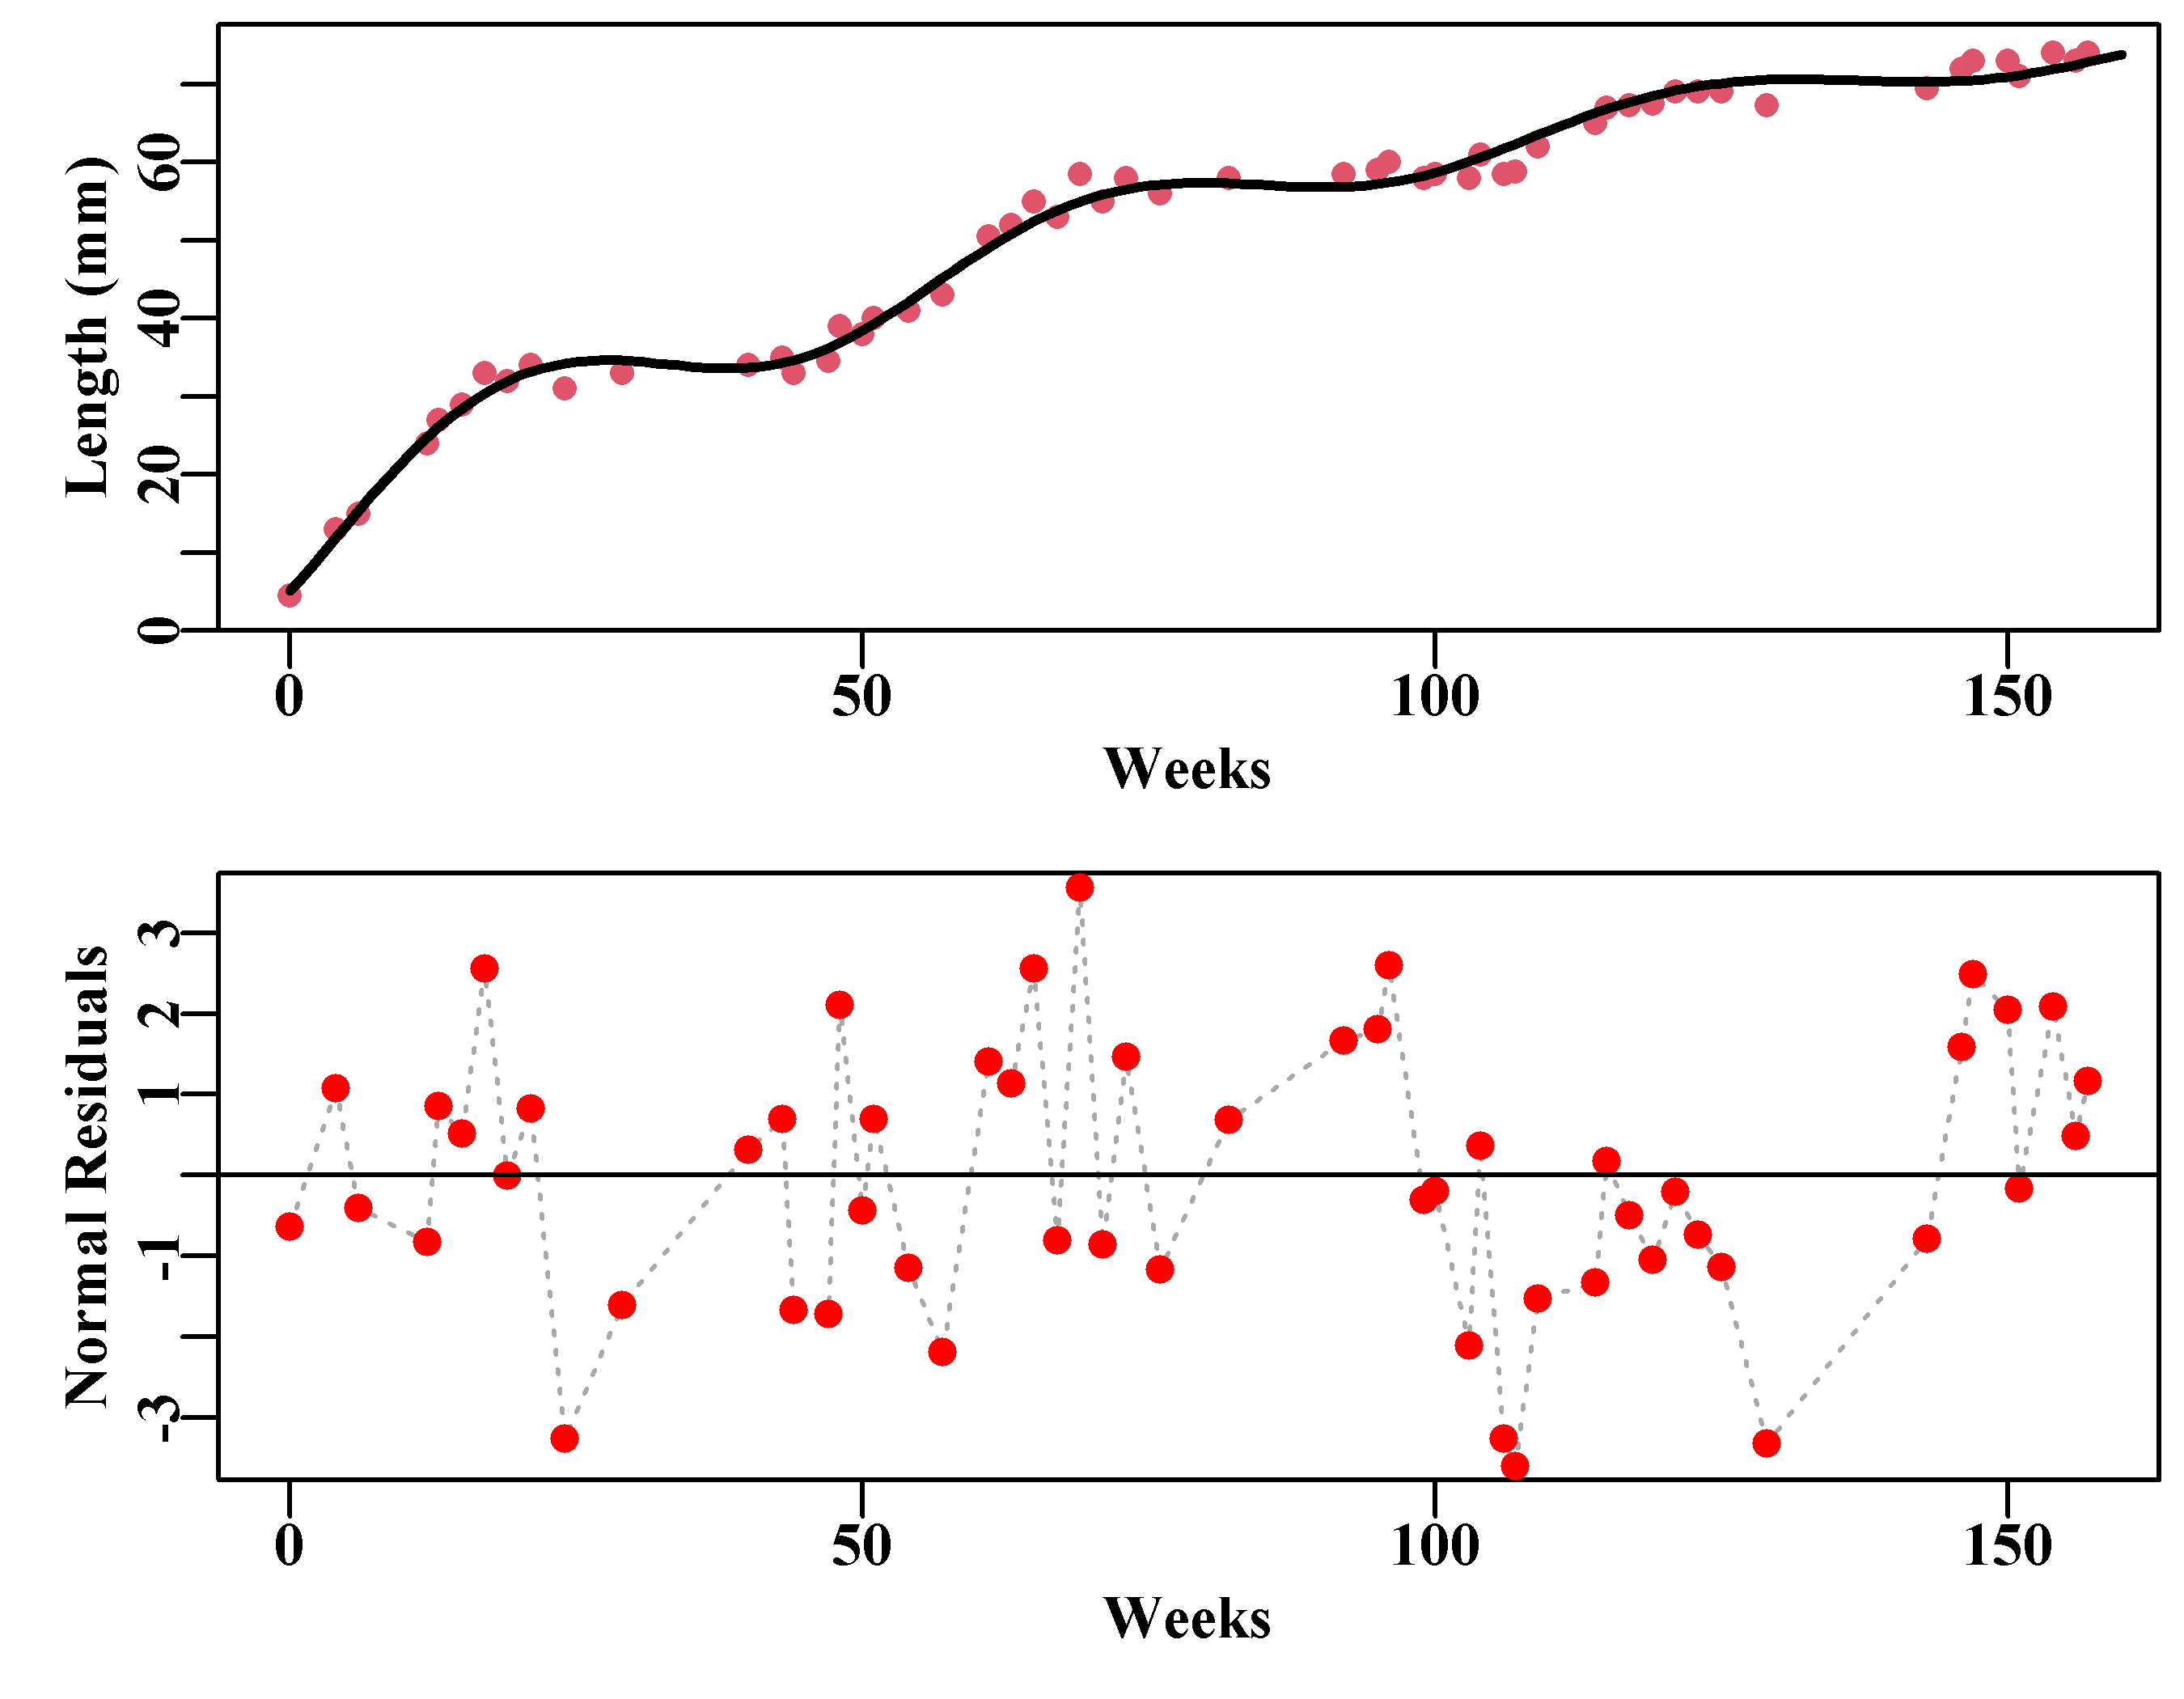 Approximate length-at-age data from Pitcher and Macdonald (1973) with a fitted seasonal version of the von Bertalanffy growth curve. The bottom plot is of the normal random residuals, which still have series of runs above and below zero but are less patterned than the non-seasonal curve.